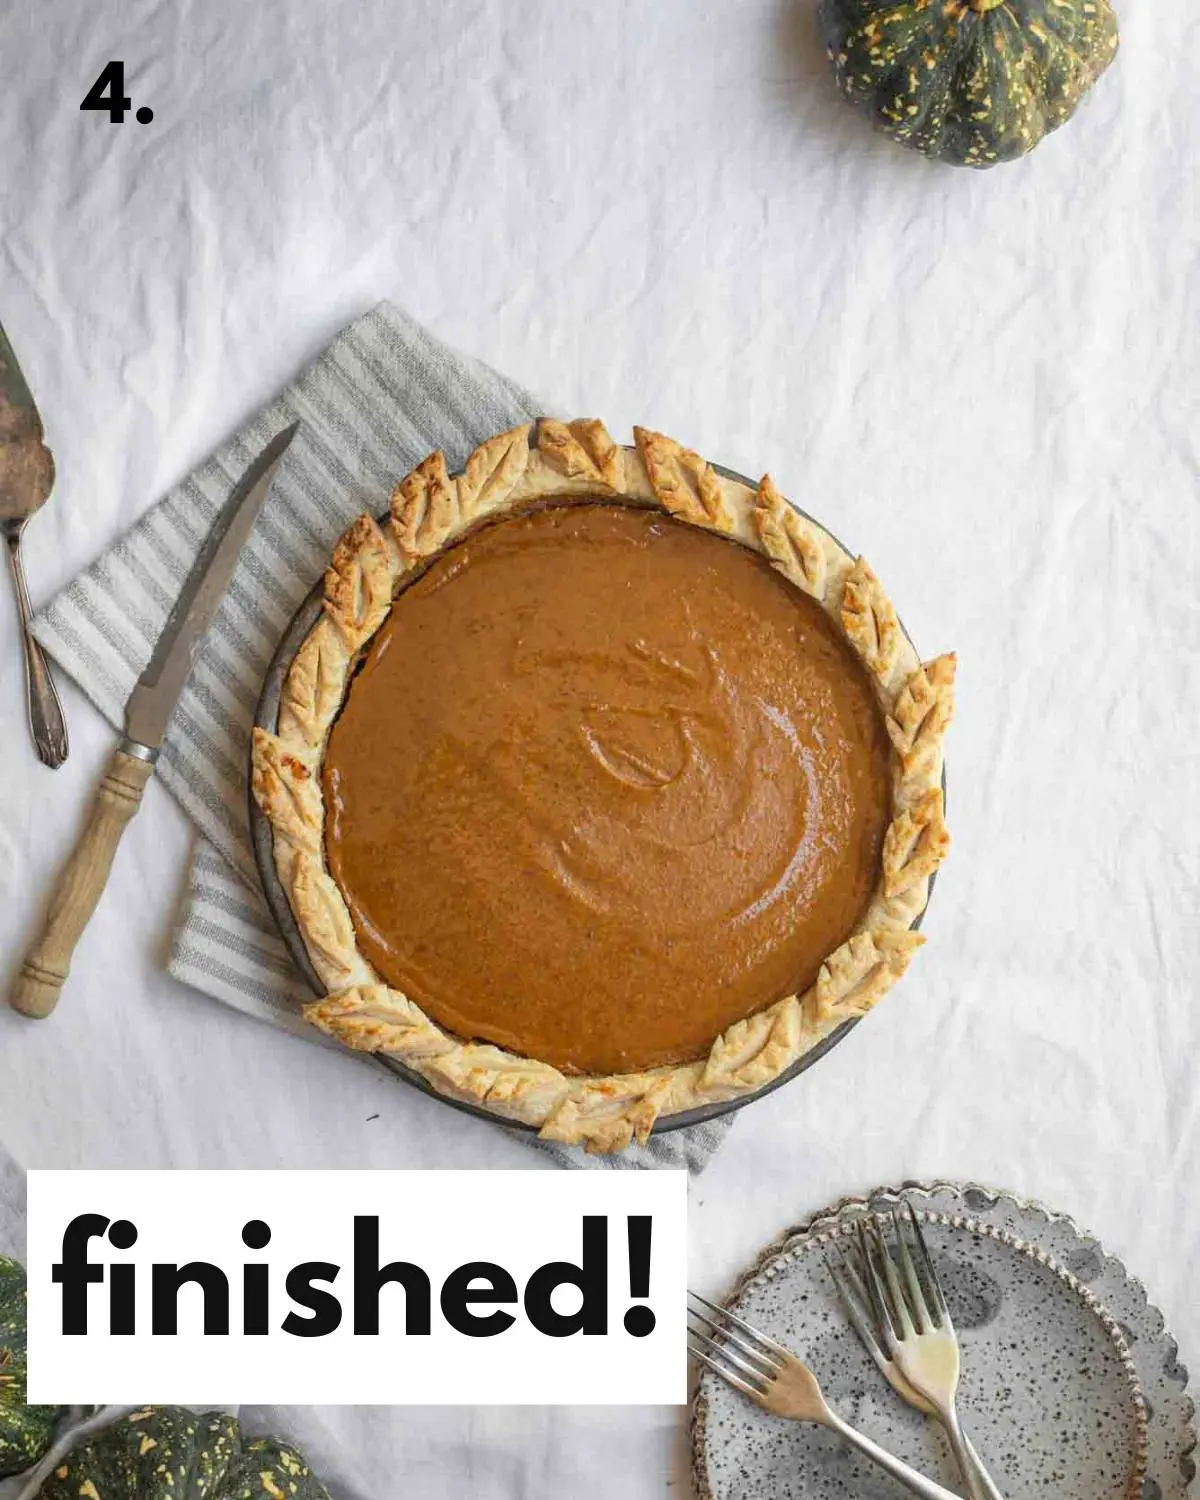 Finished pumpkin pie sitting on a table.